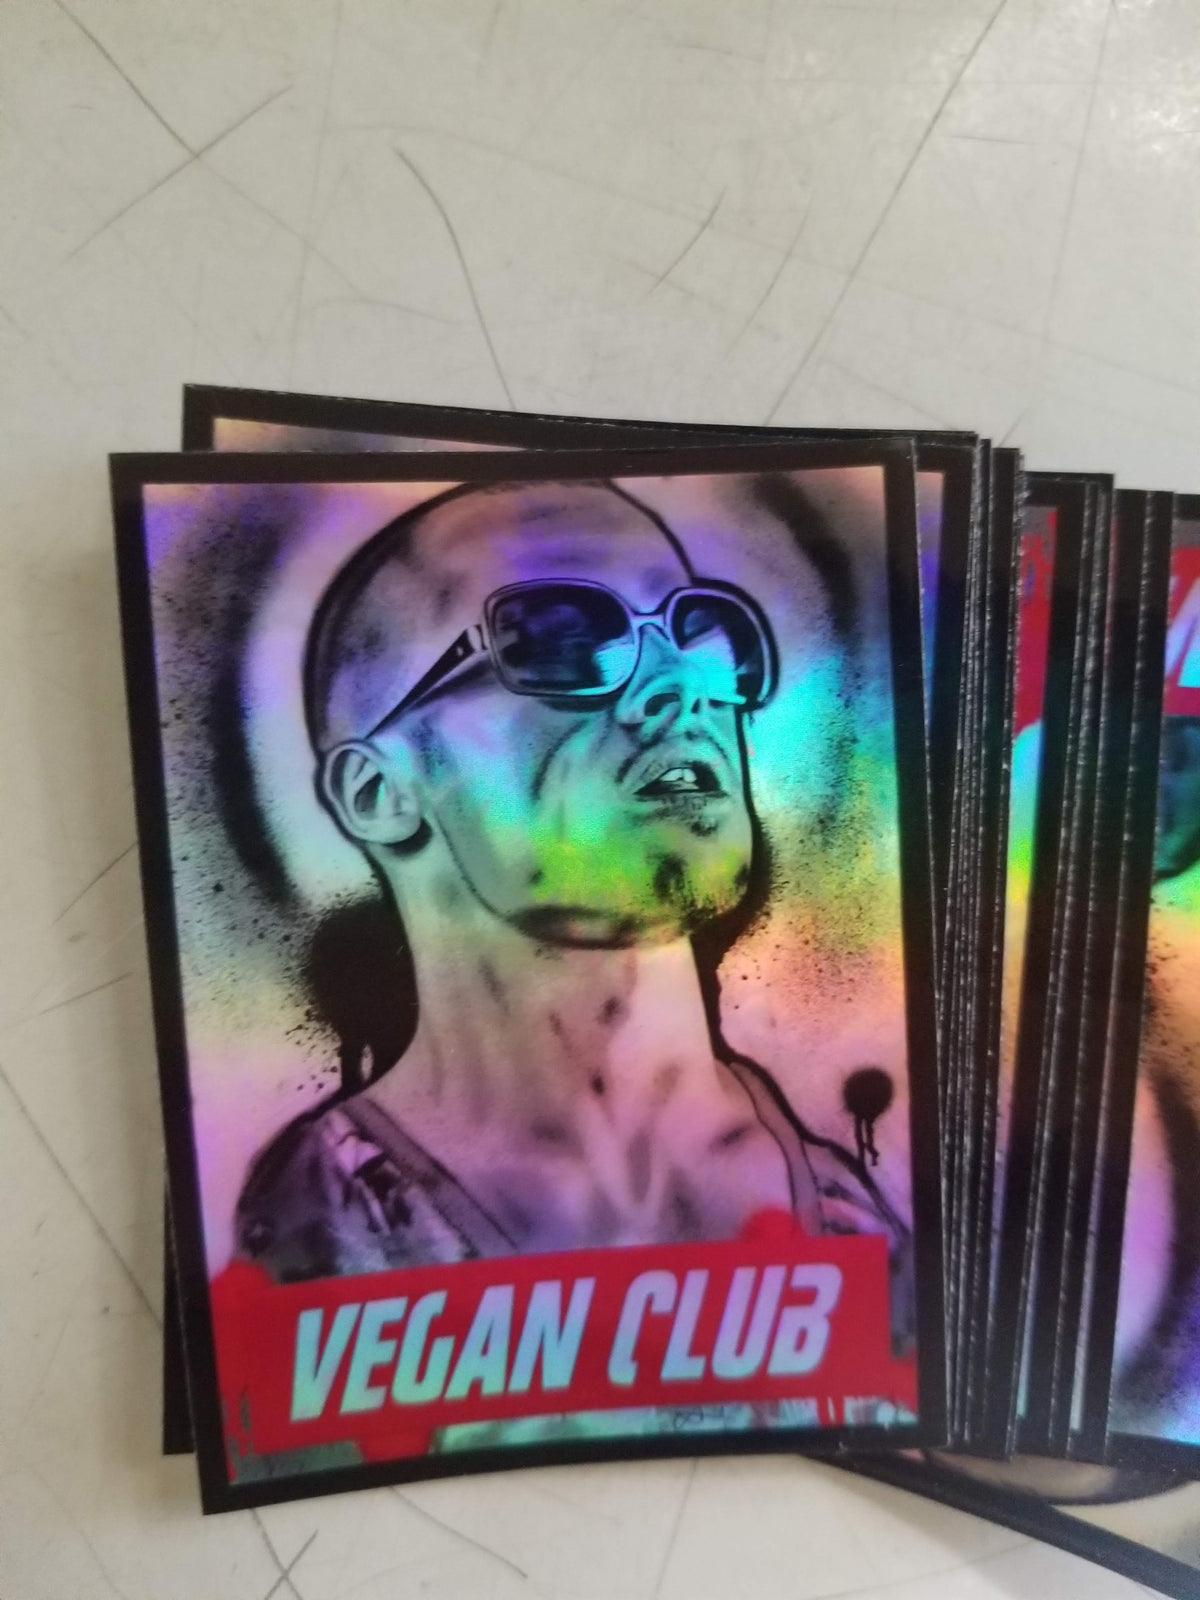 SOLD OUT - 5 Vegan Club Stickers featuring Brad Pitt 3"x2"